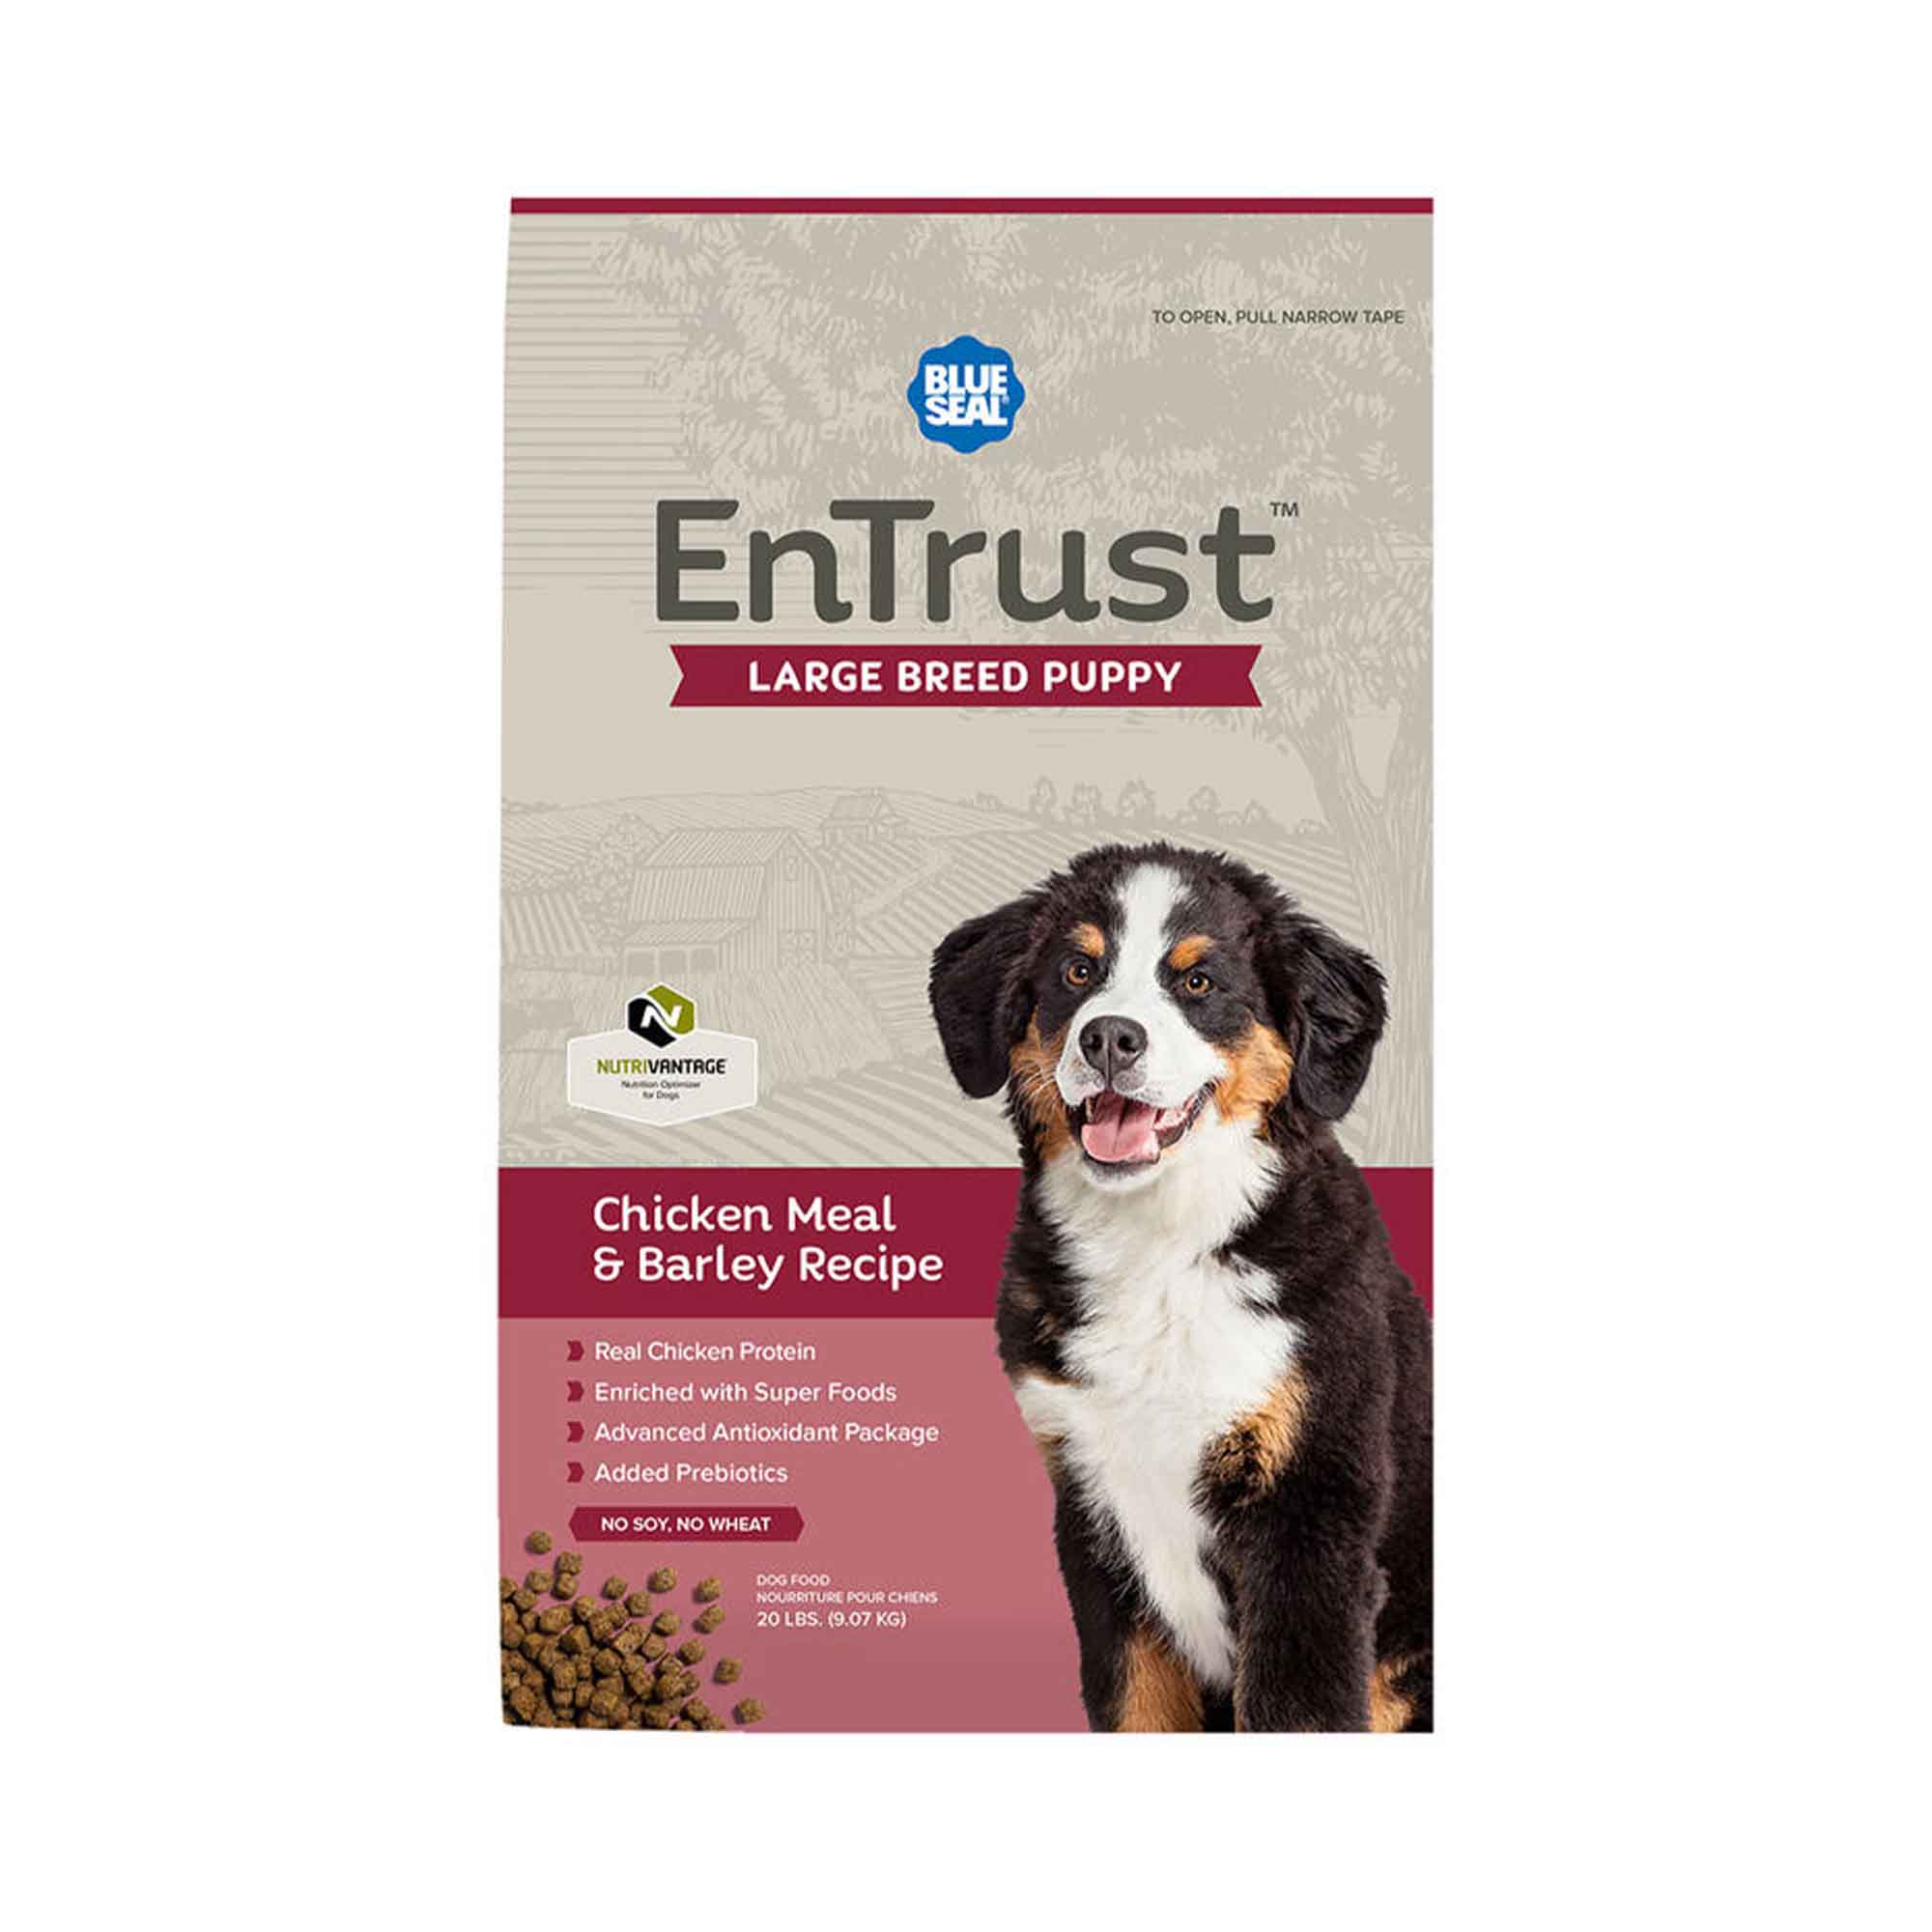 Blue Seal EnTrust Large Breed Puppy Chicken Meal & Barley Recipe